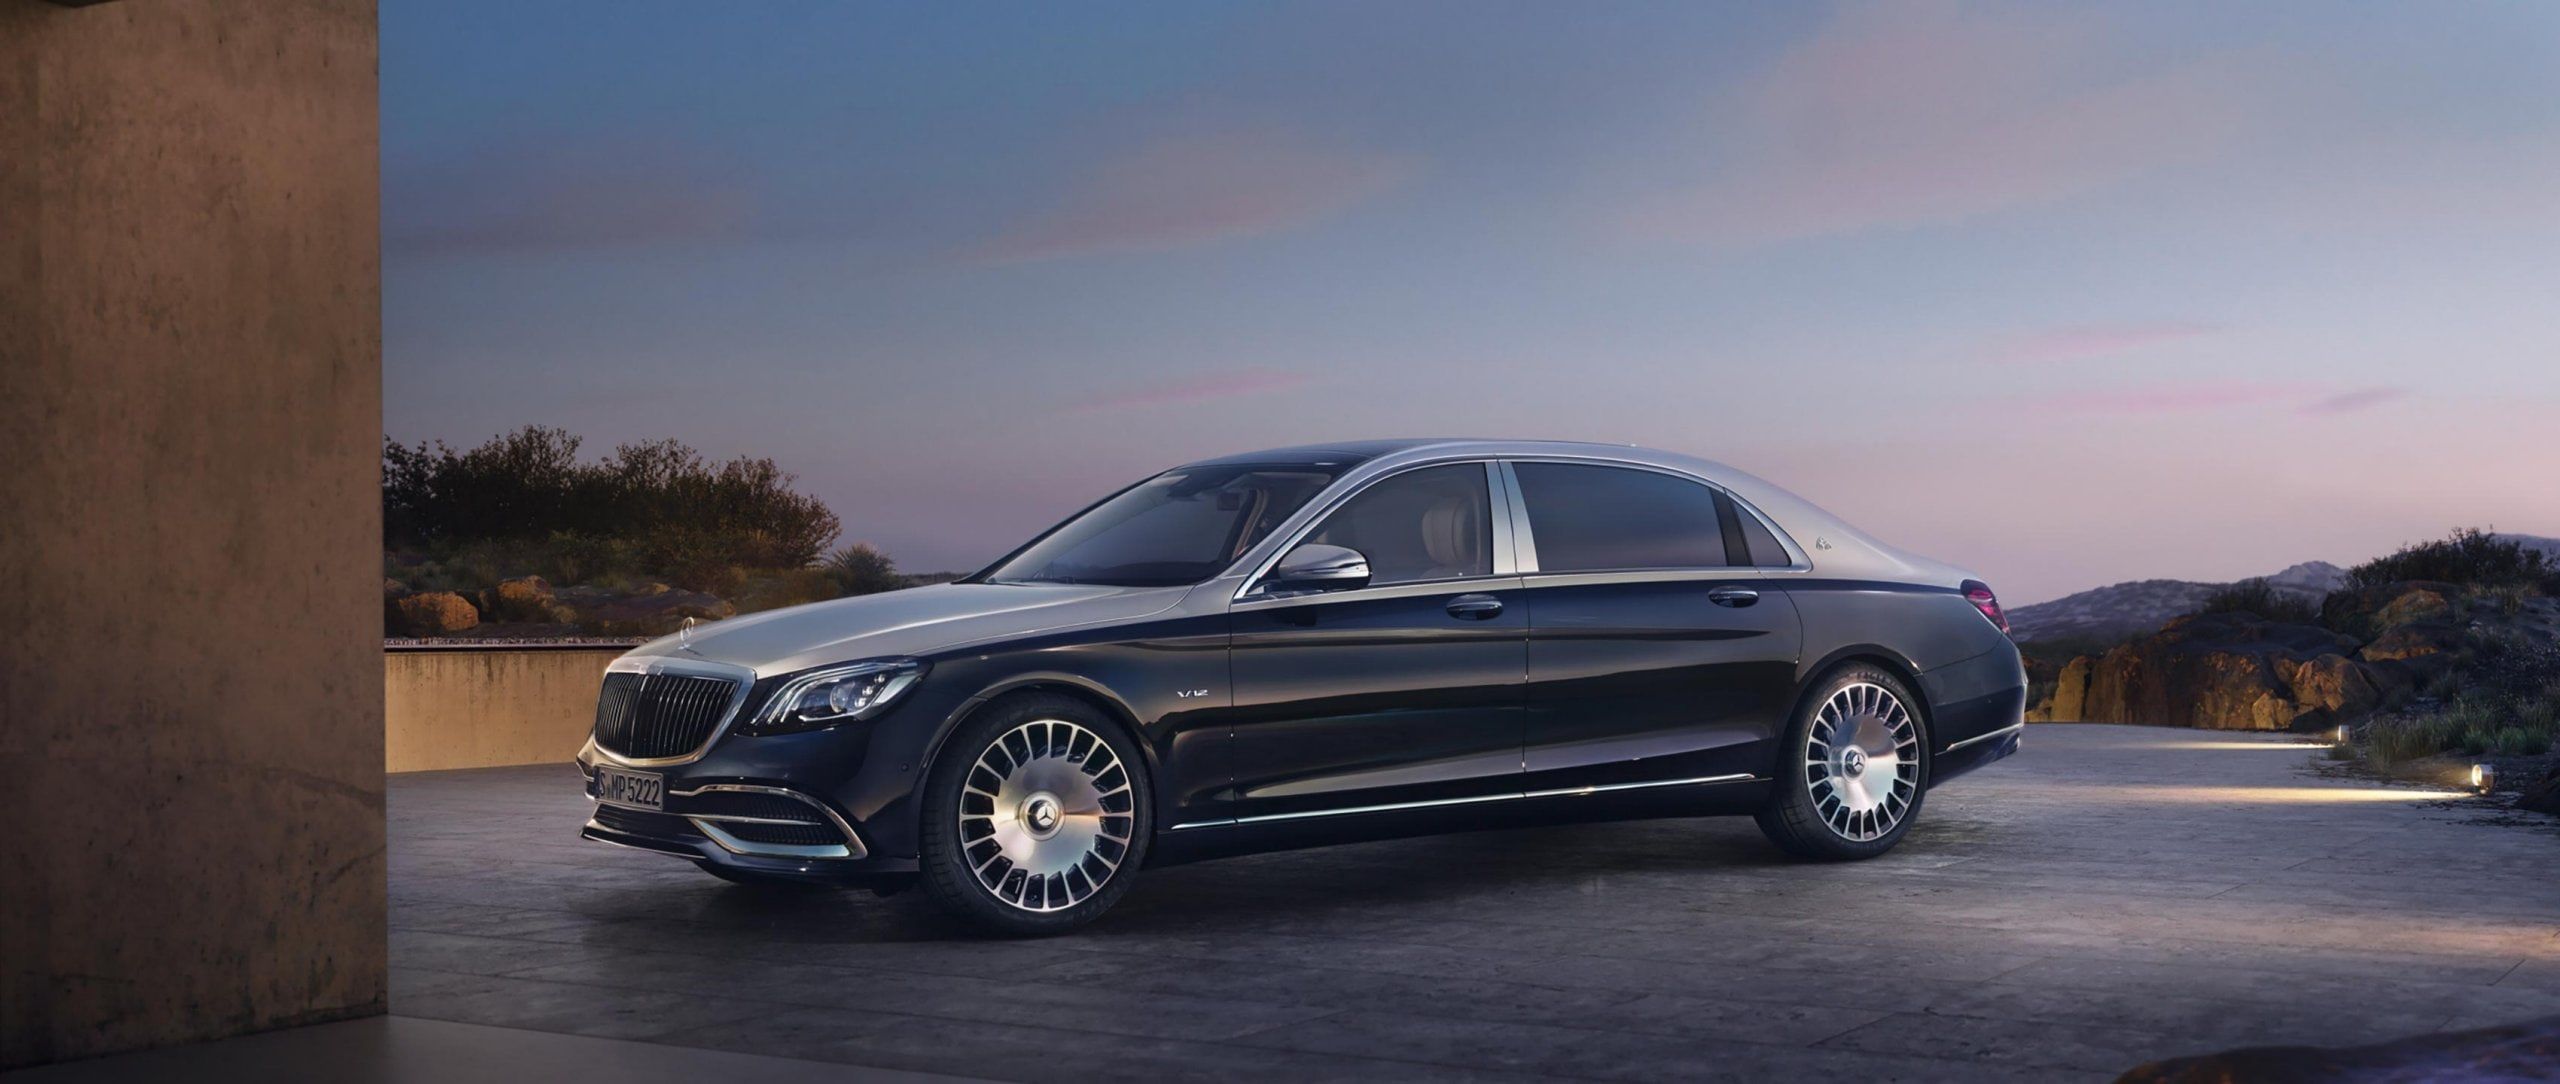 The Mercedes Maybach S Class In A New Look